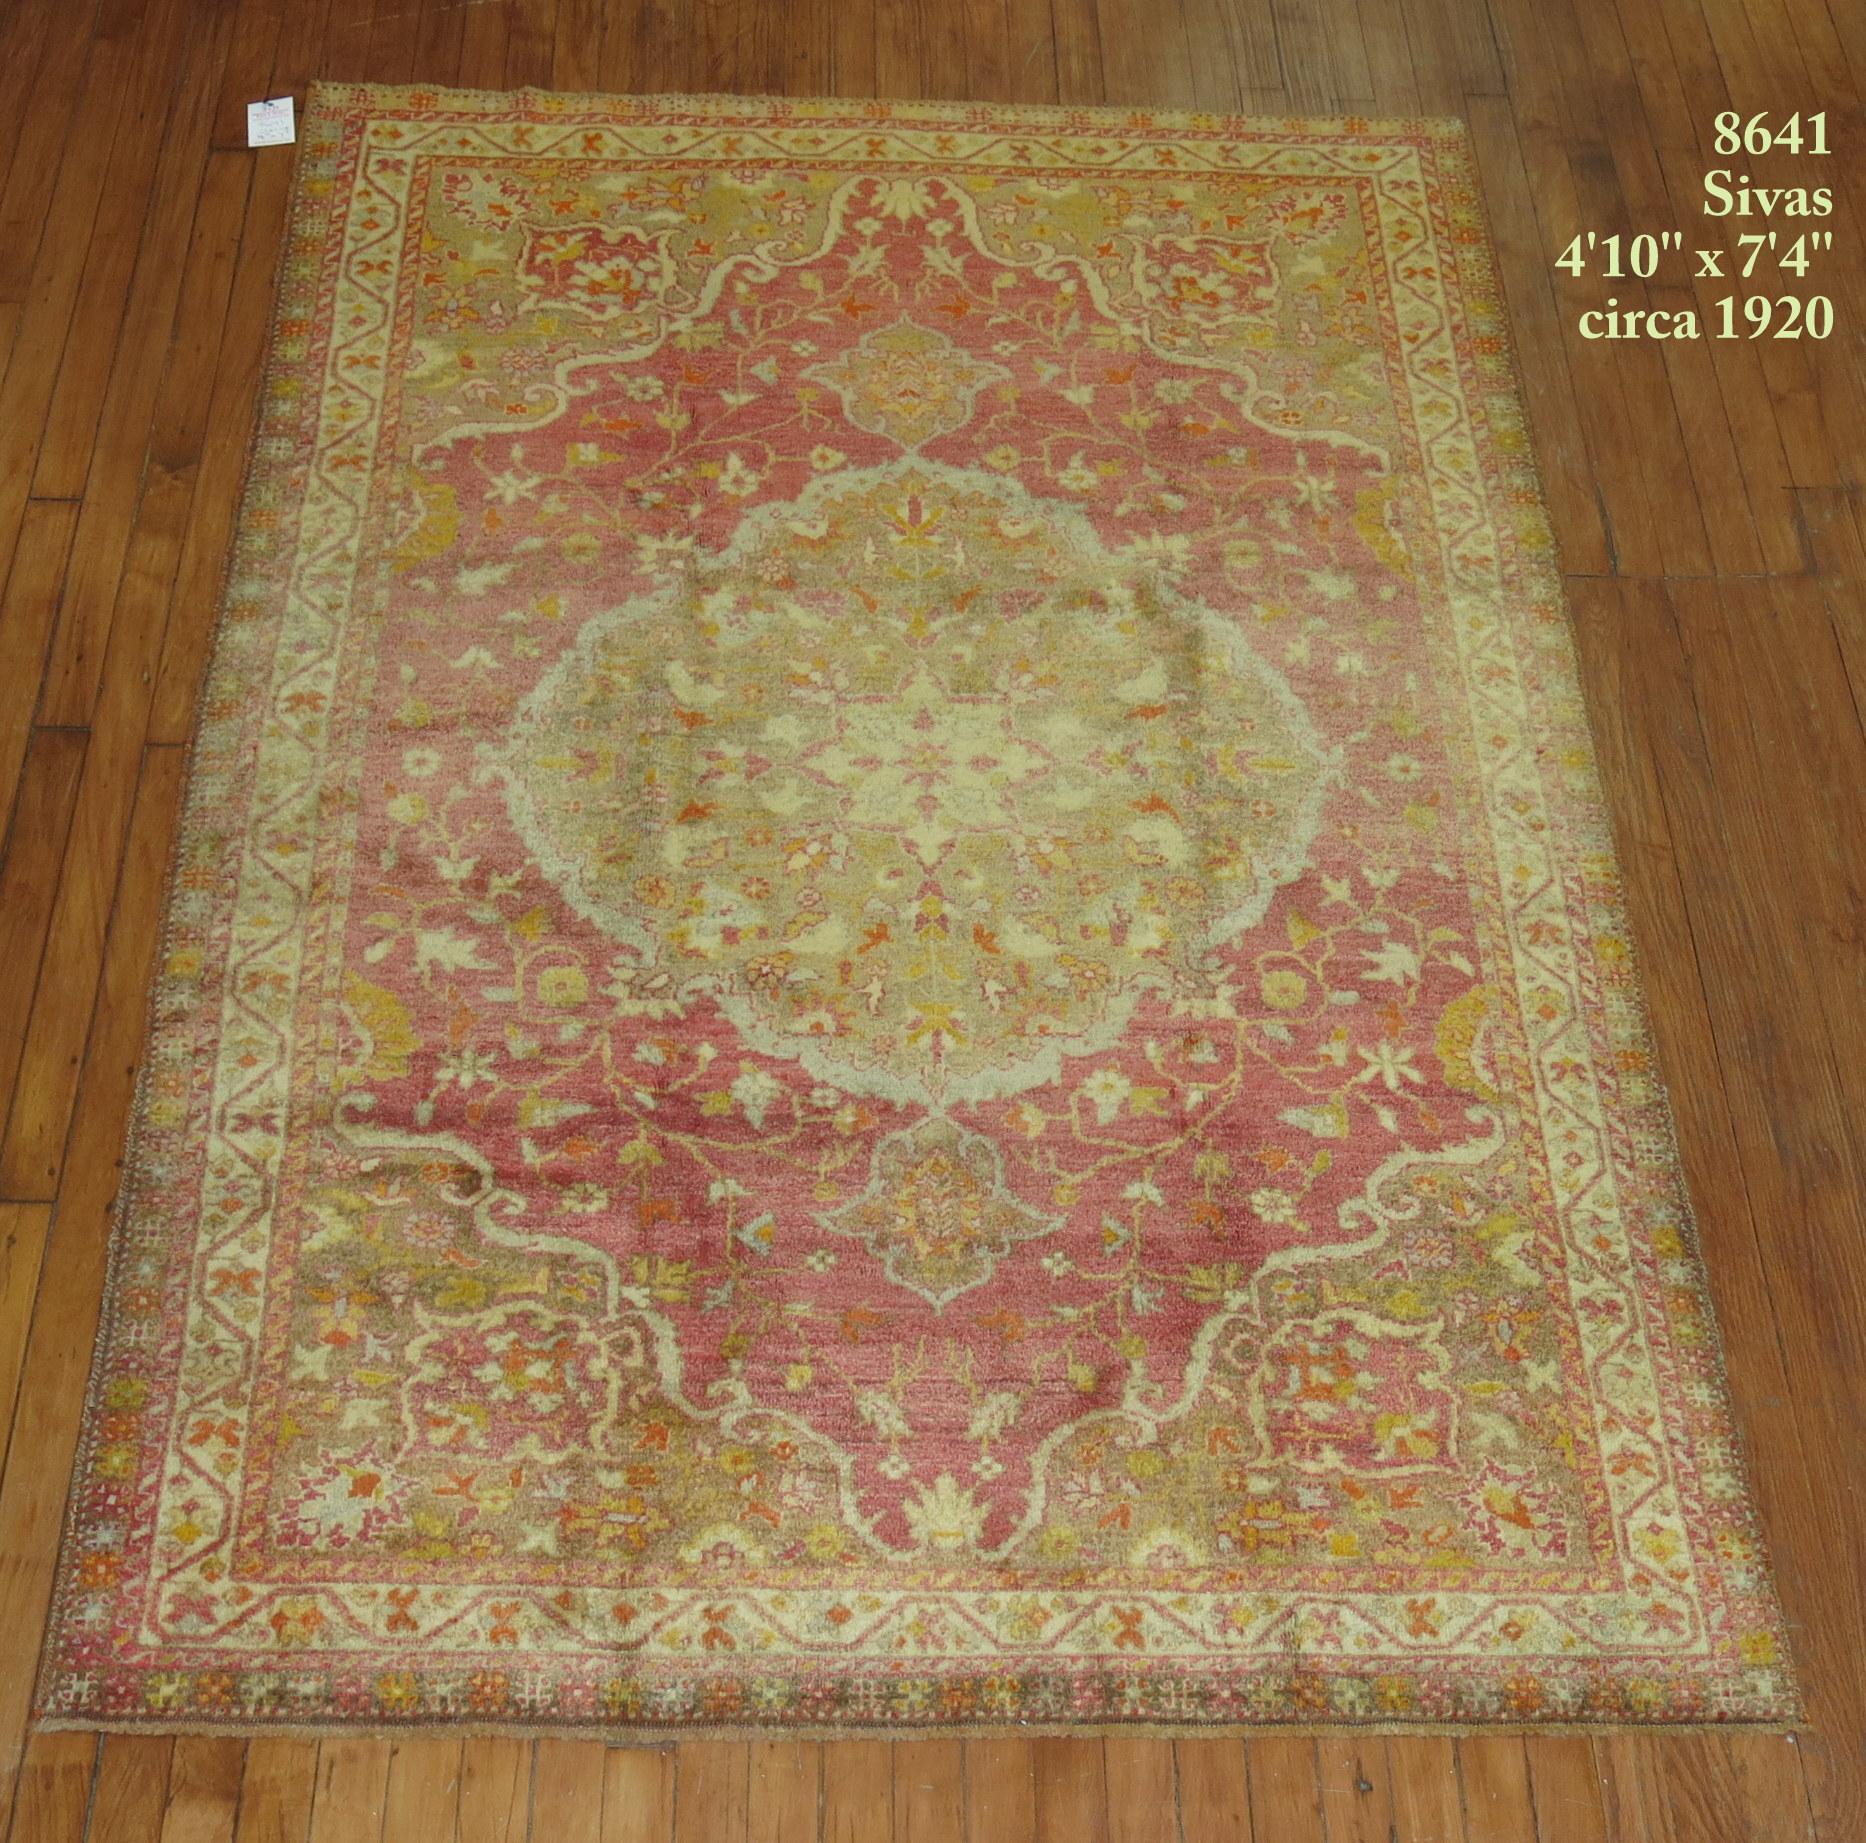 A superfine connoisseur caliber early century Turkish rug with an elegant medallion border motif in red pumpkin orange, brown, and green. 

Measures: 4'10'' x 7'4''.